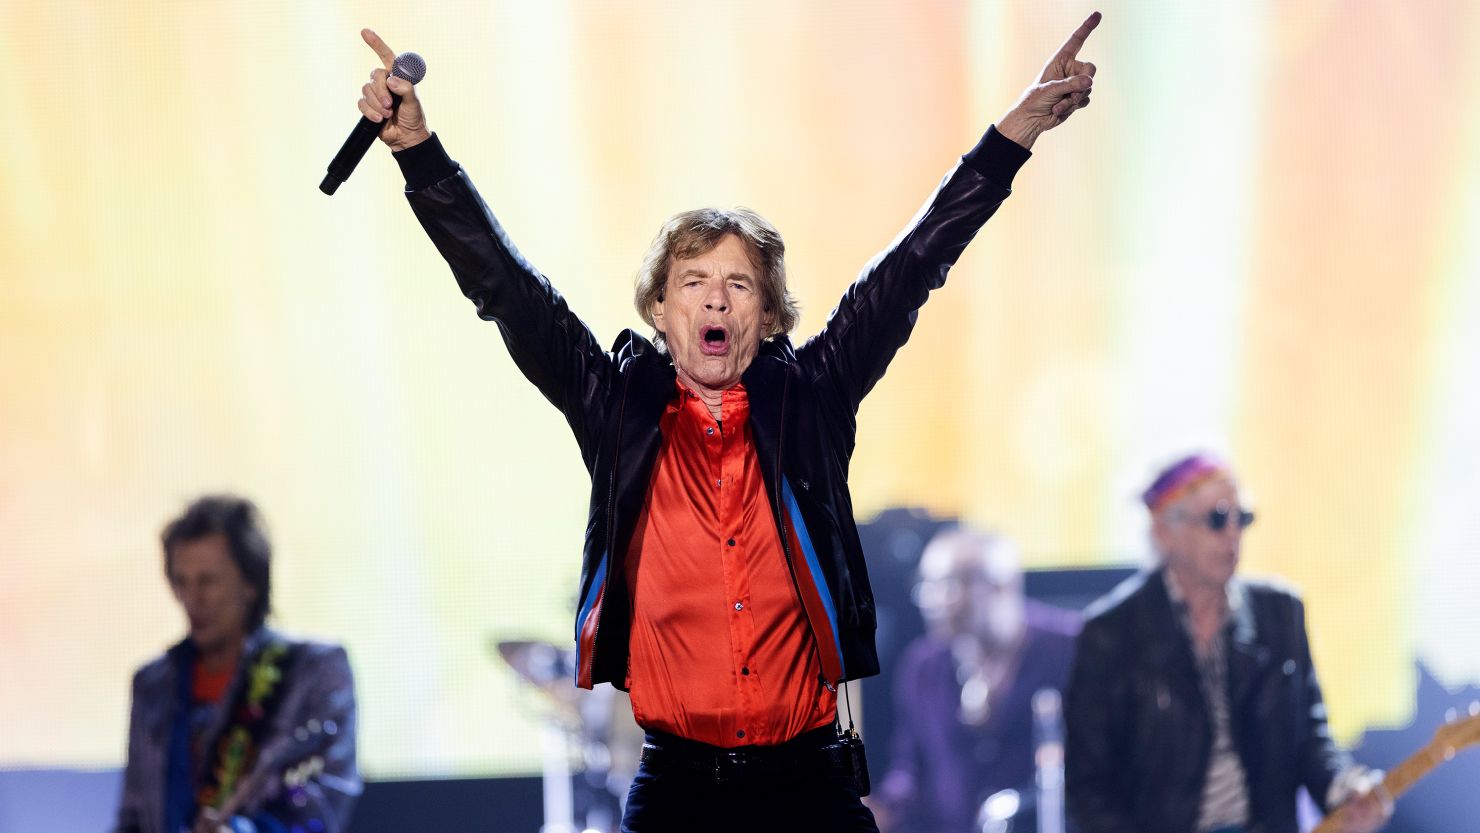 Mick Jagger of The Rolling Stones performs on stage during a concert as part of their 'Stones Sixty European Tour' on July 31, 2022 at Friends Arena in Solna, Sweden. 